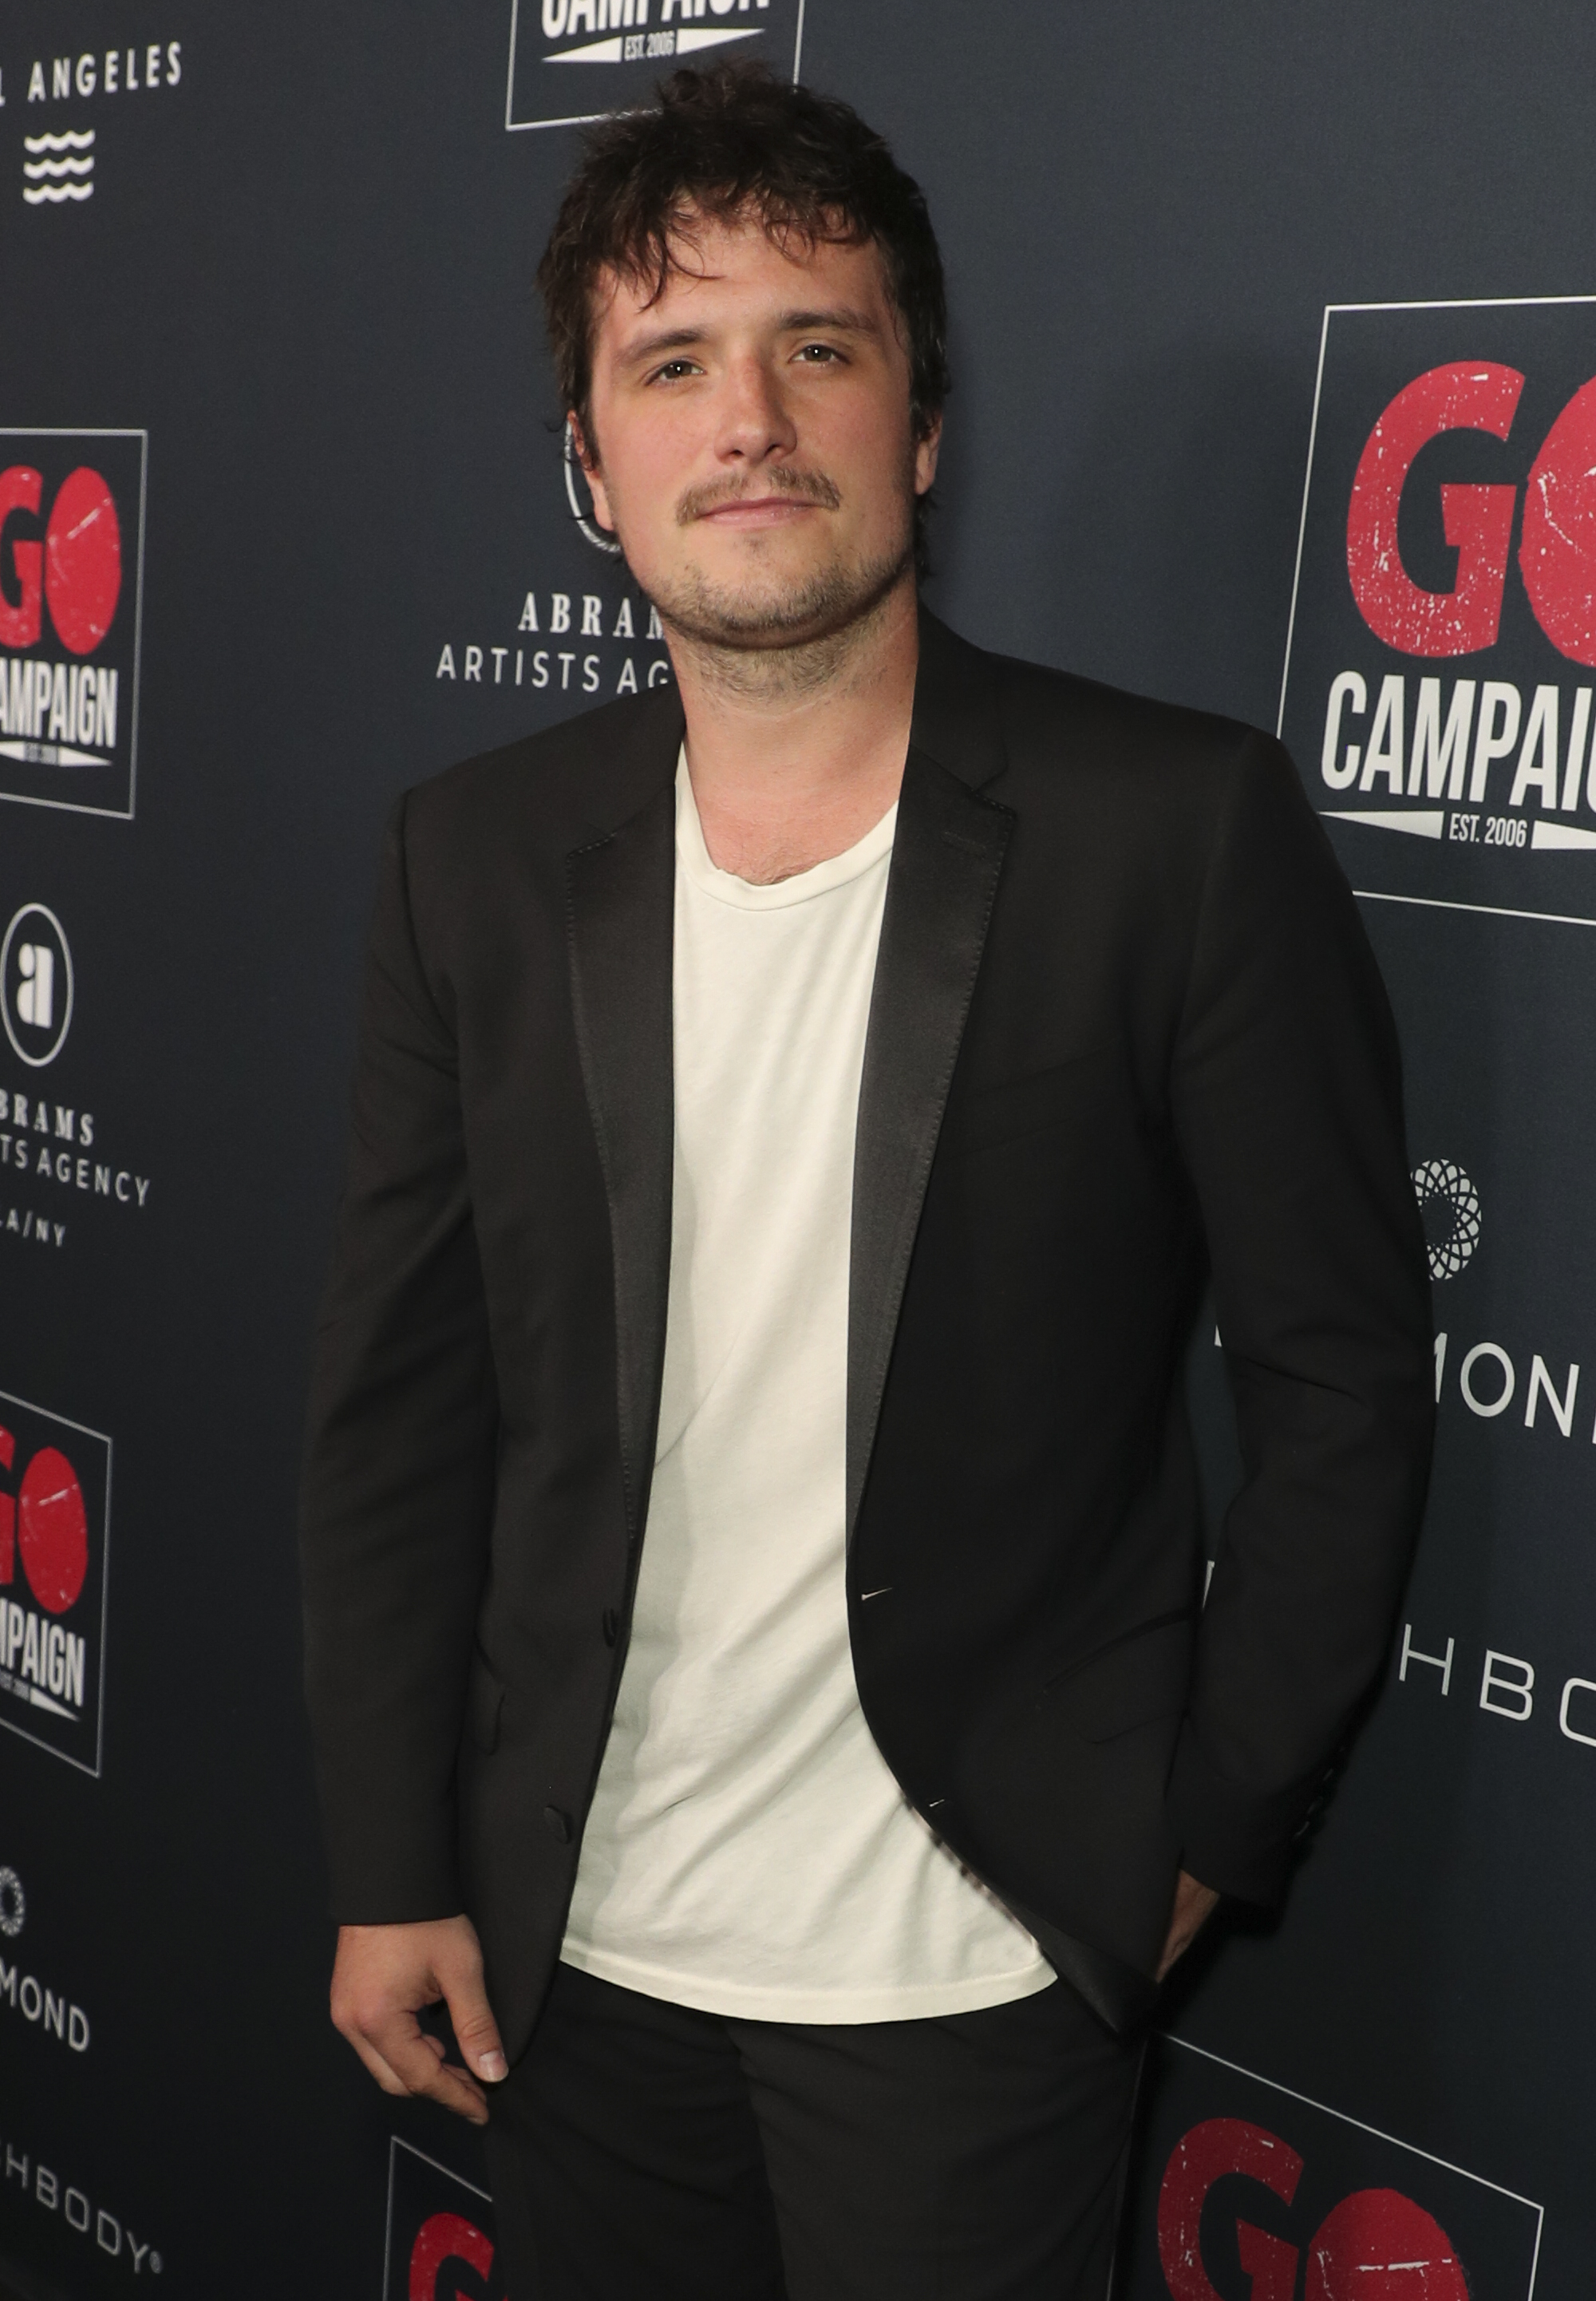 Josh in a suit jacket, T-shirt, and pants